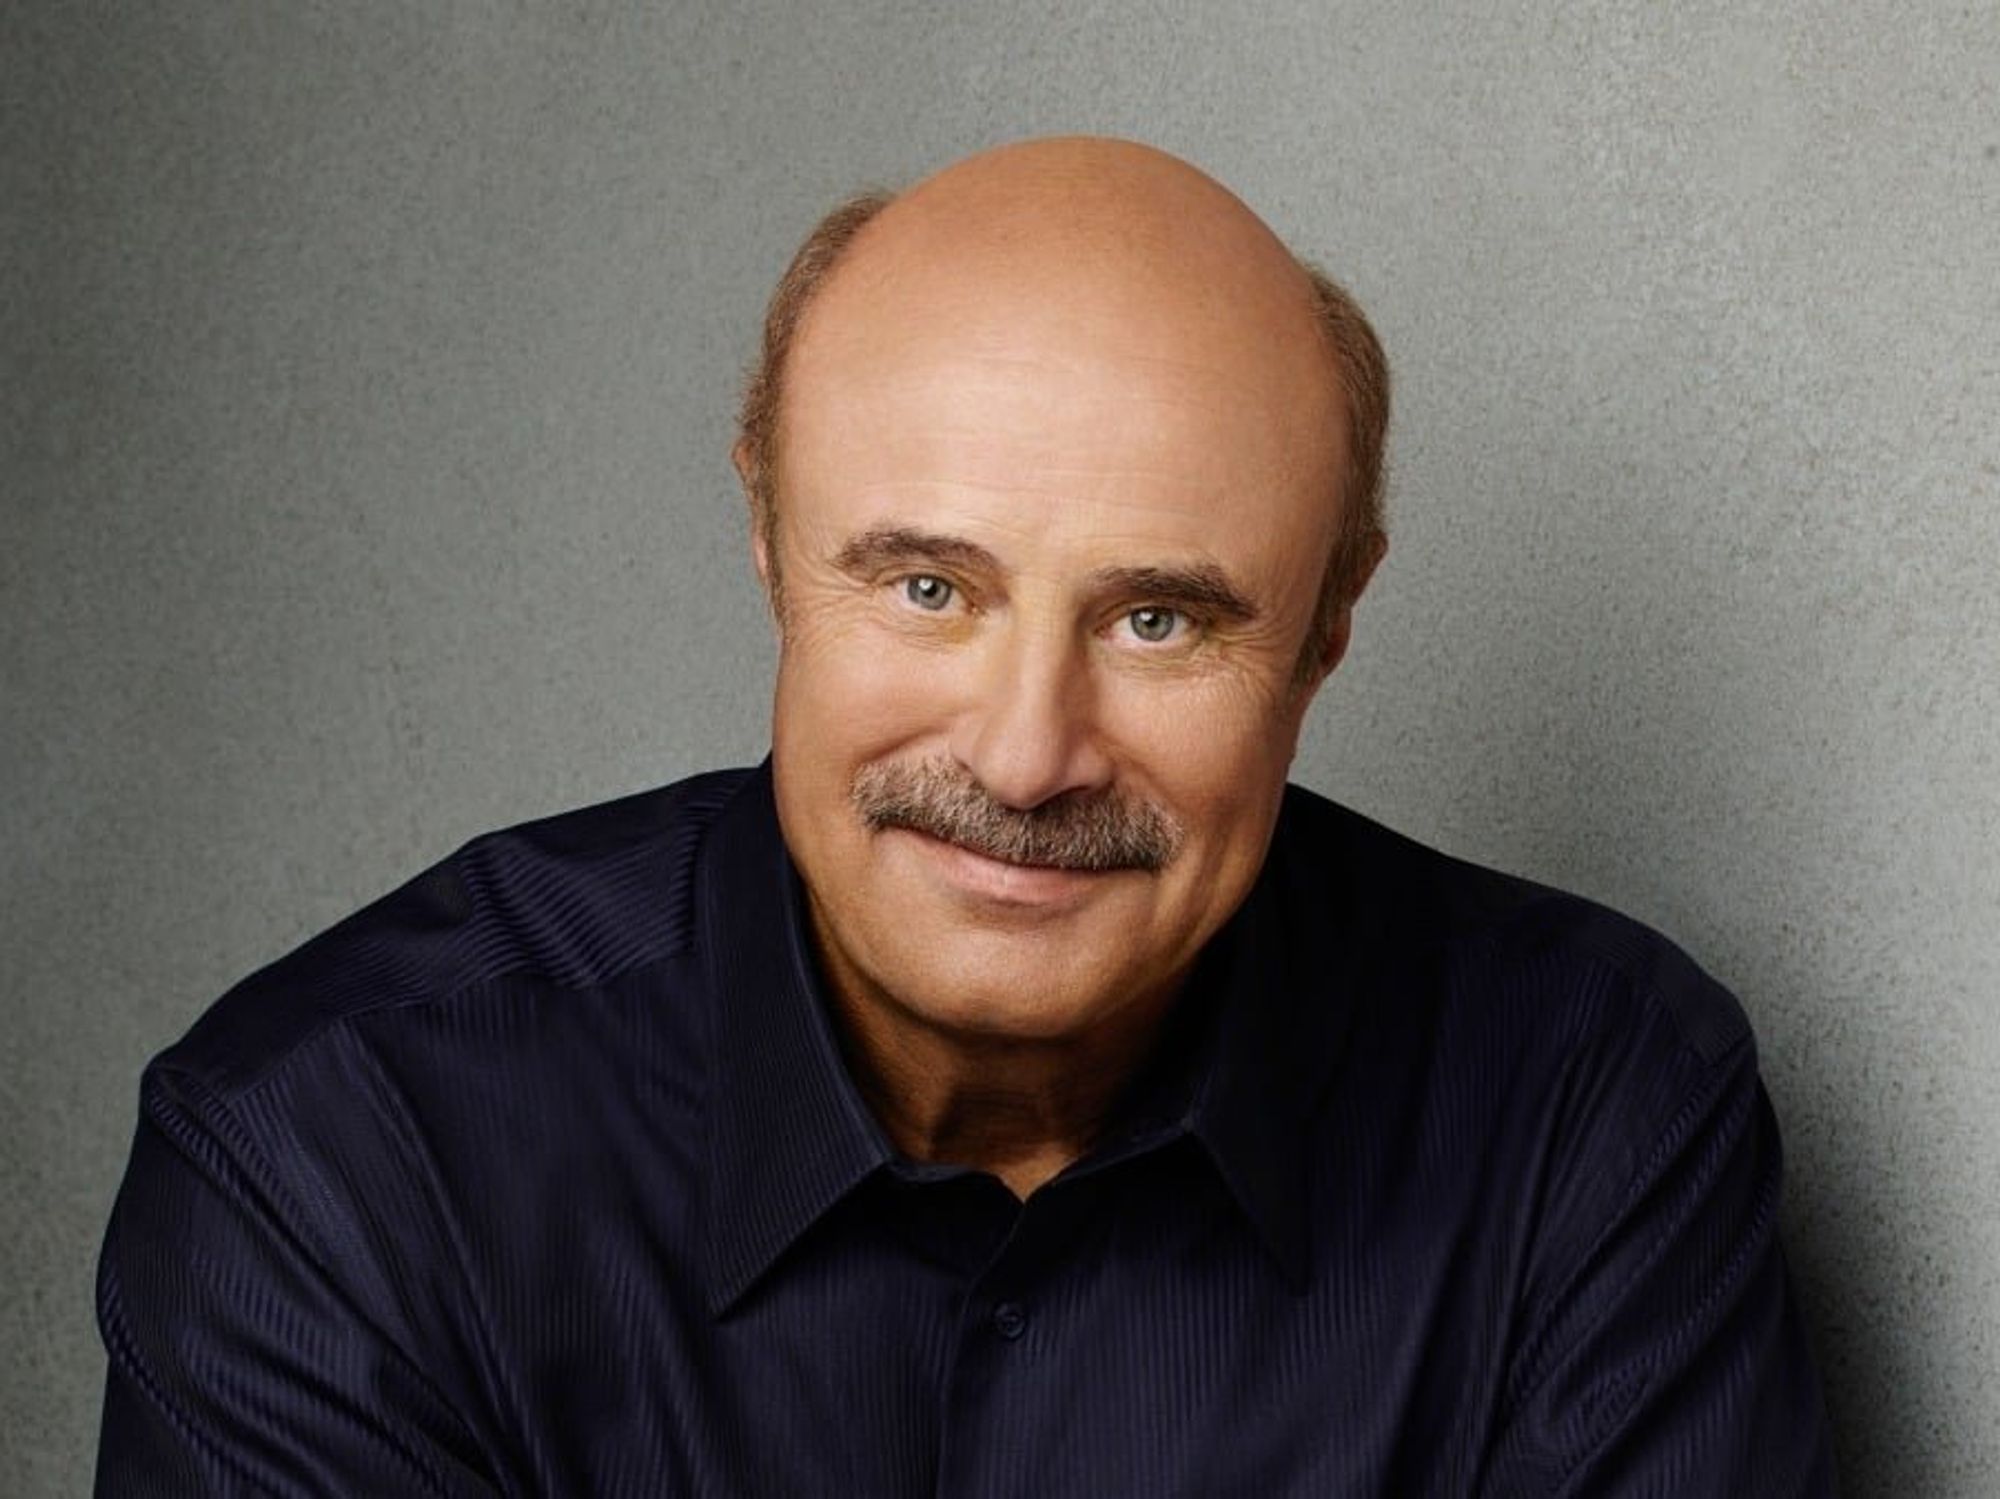 Dr. Phil drops new Texas TV show and network for 'real people' with